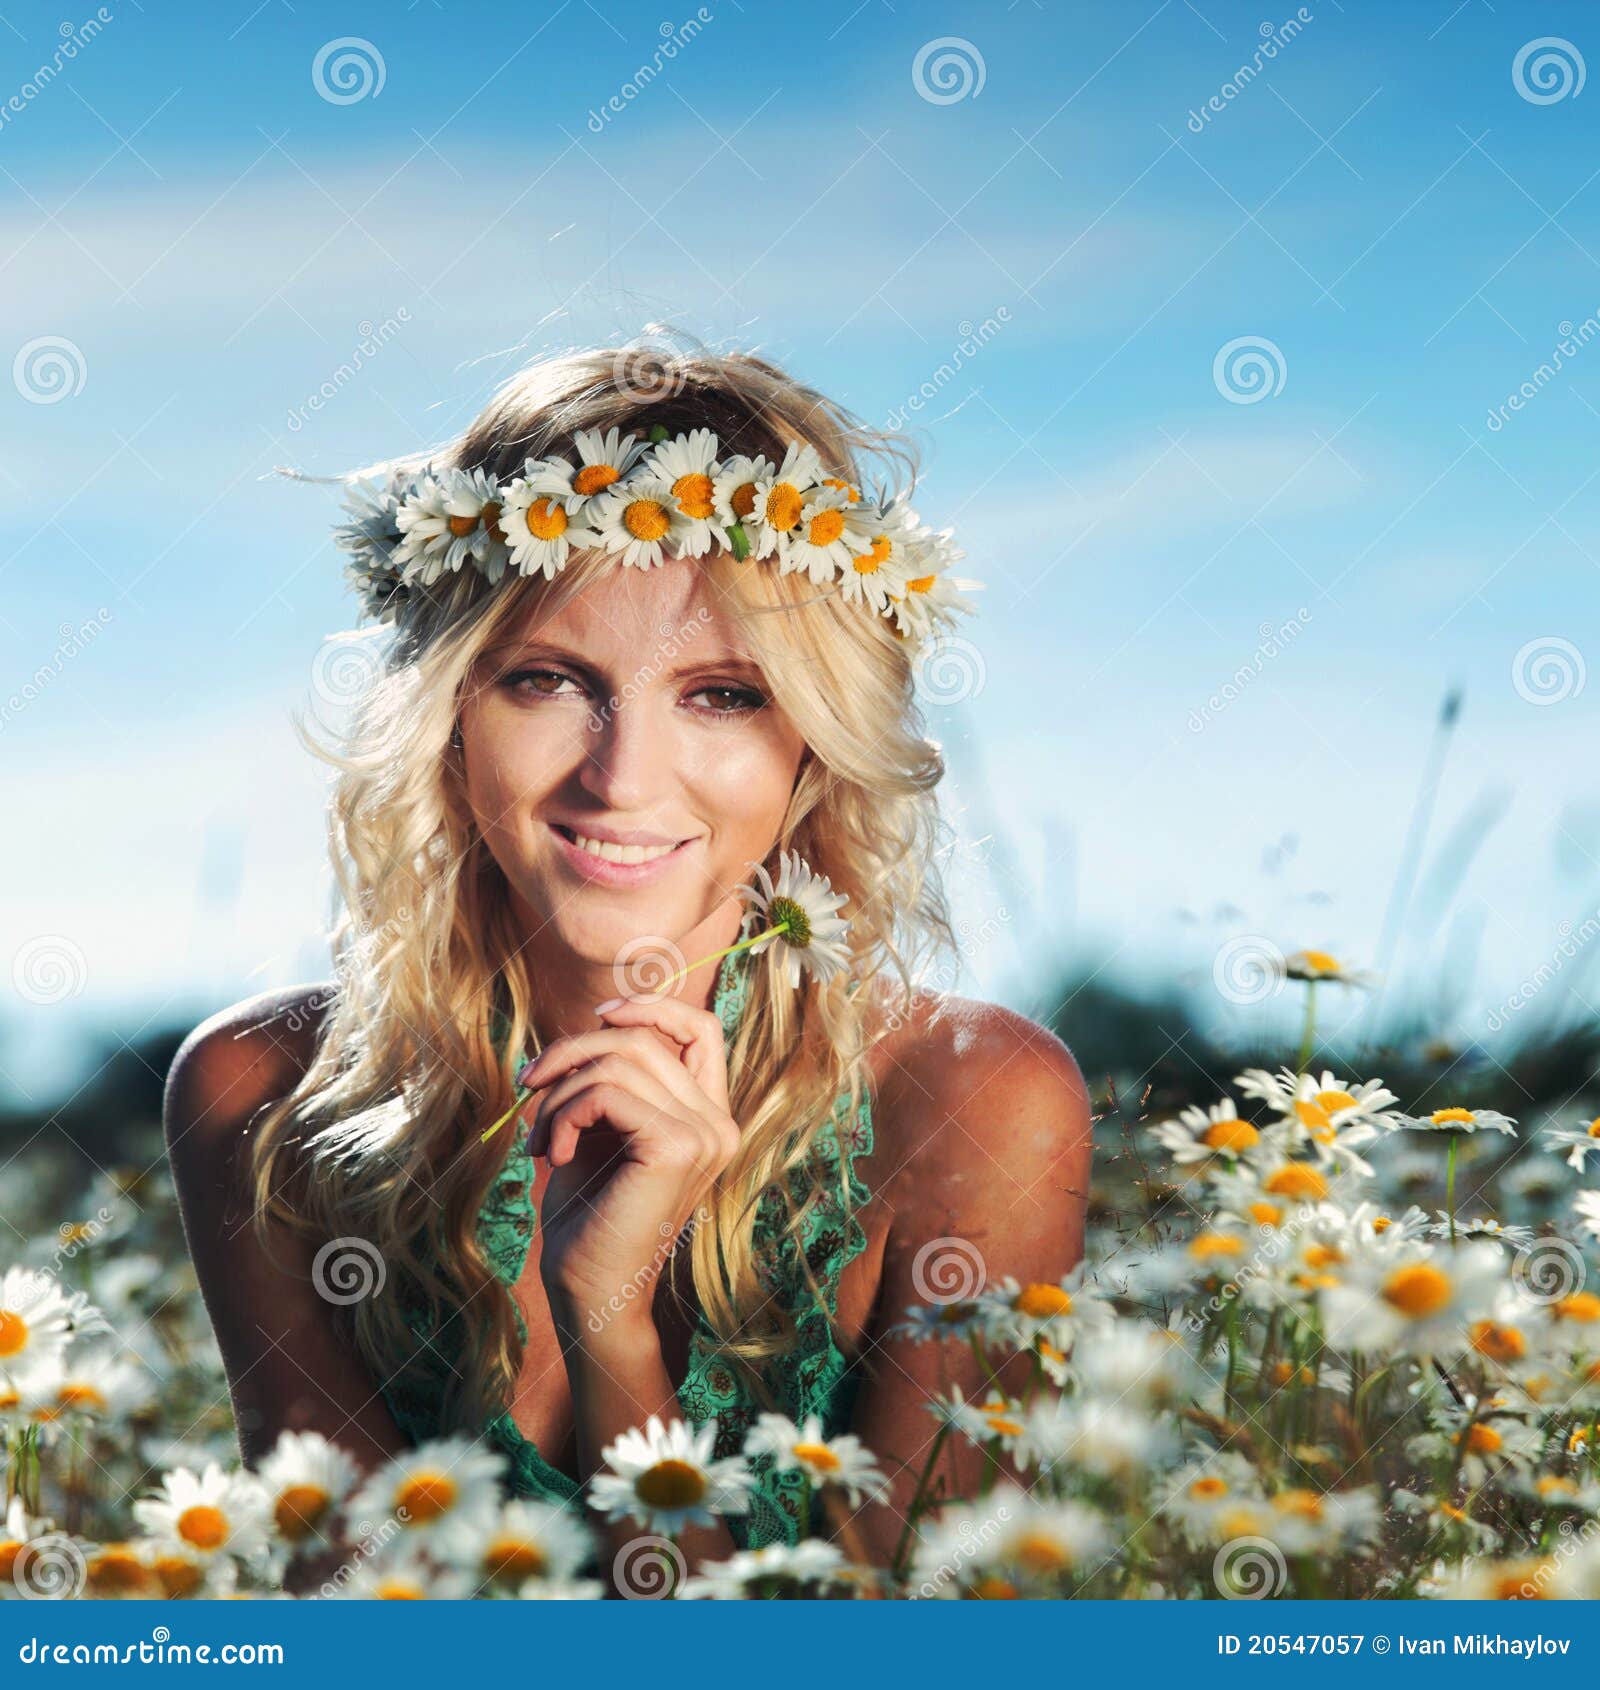 Girl on the Daisy Flowers Field Stock Image - Image of outdoor, adult ...